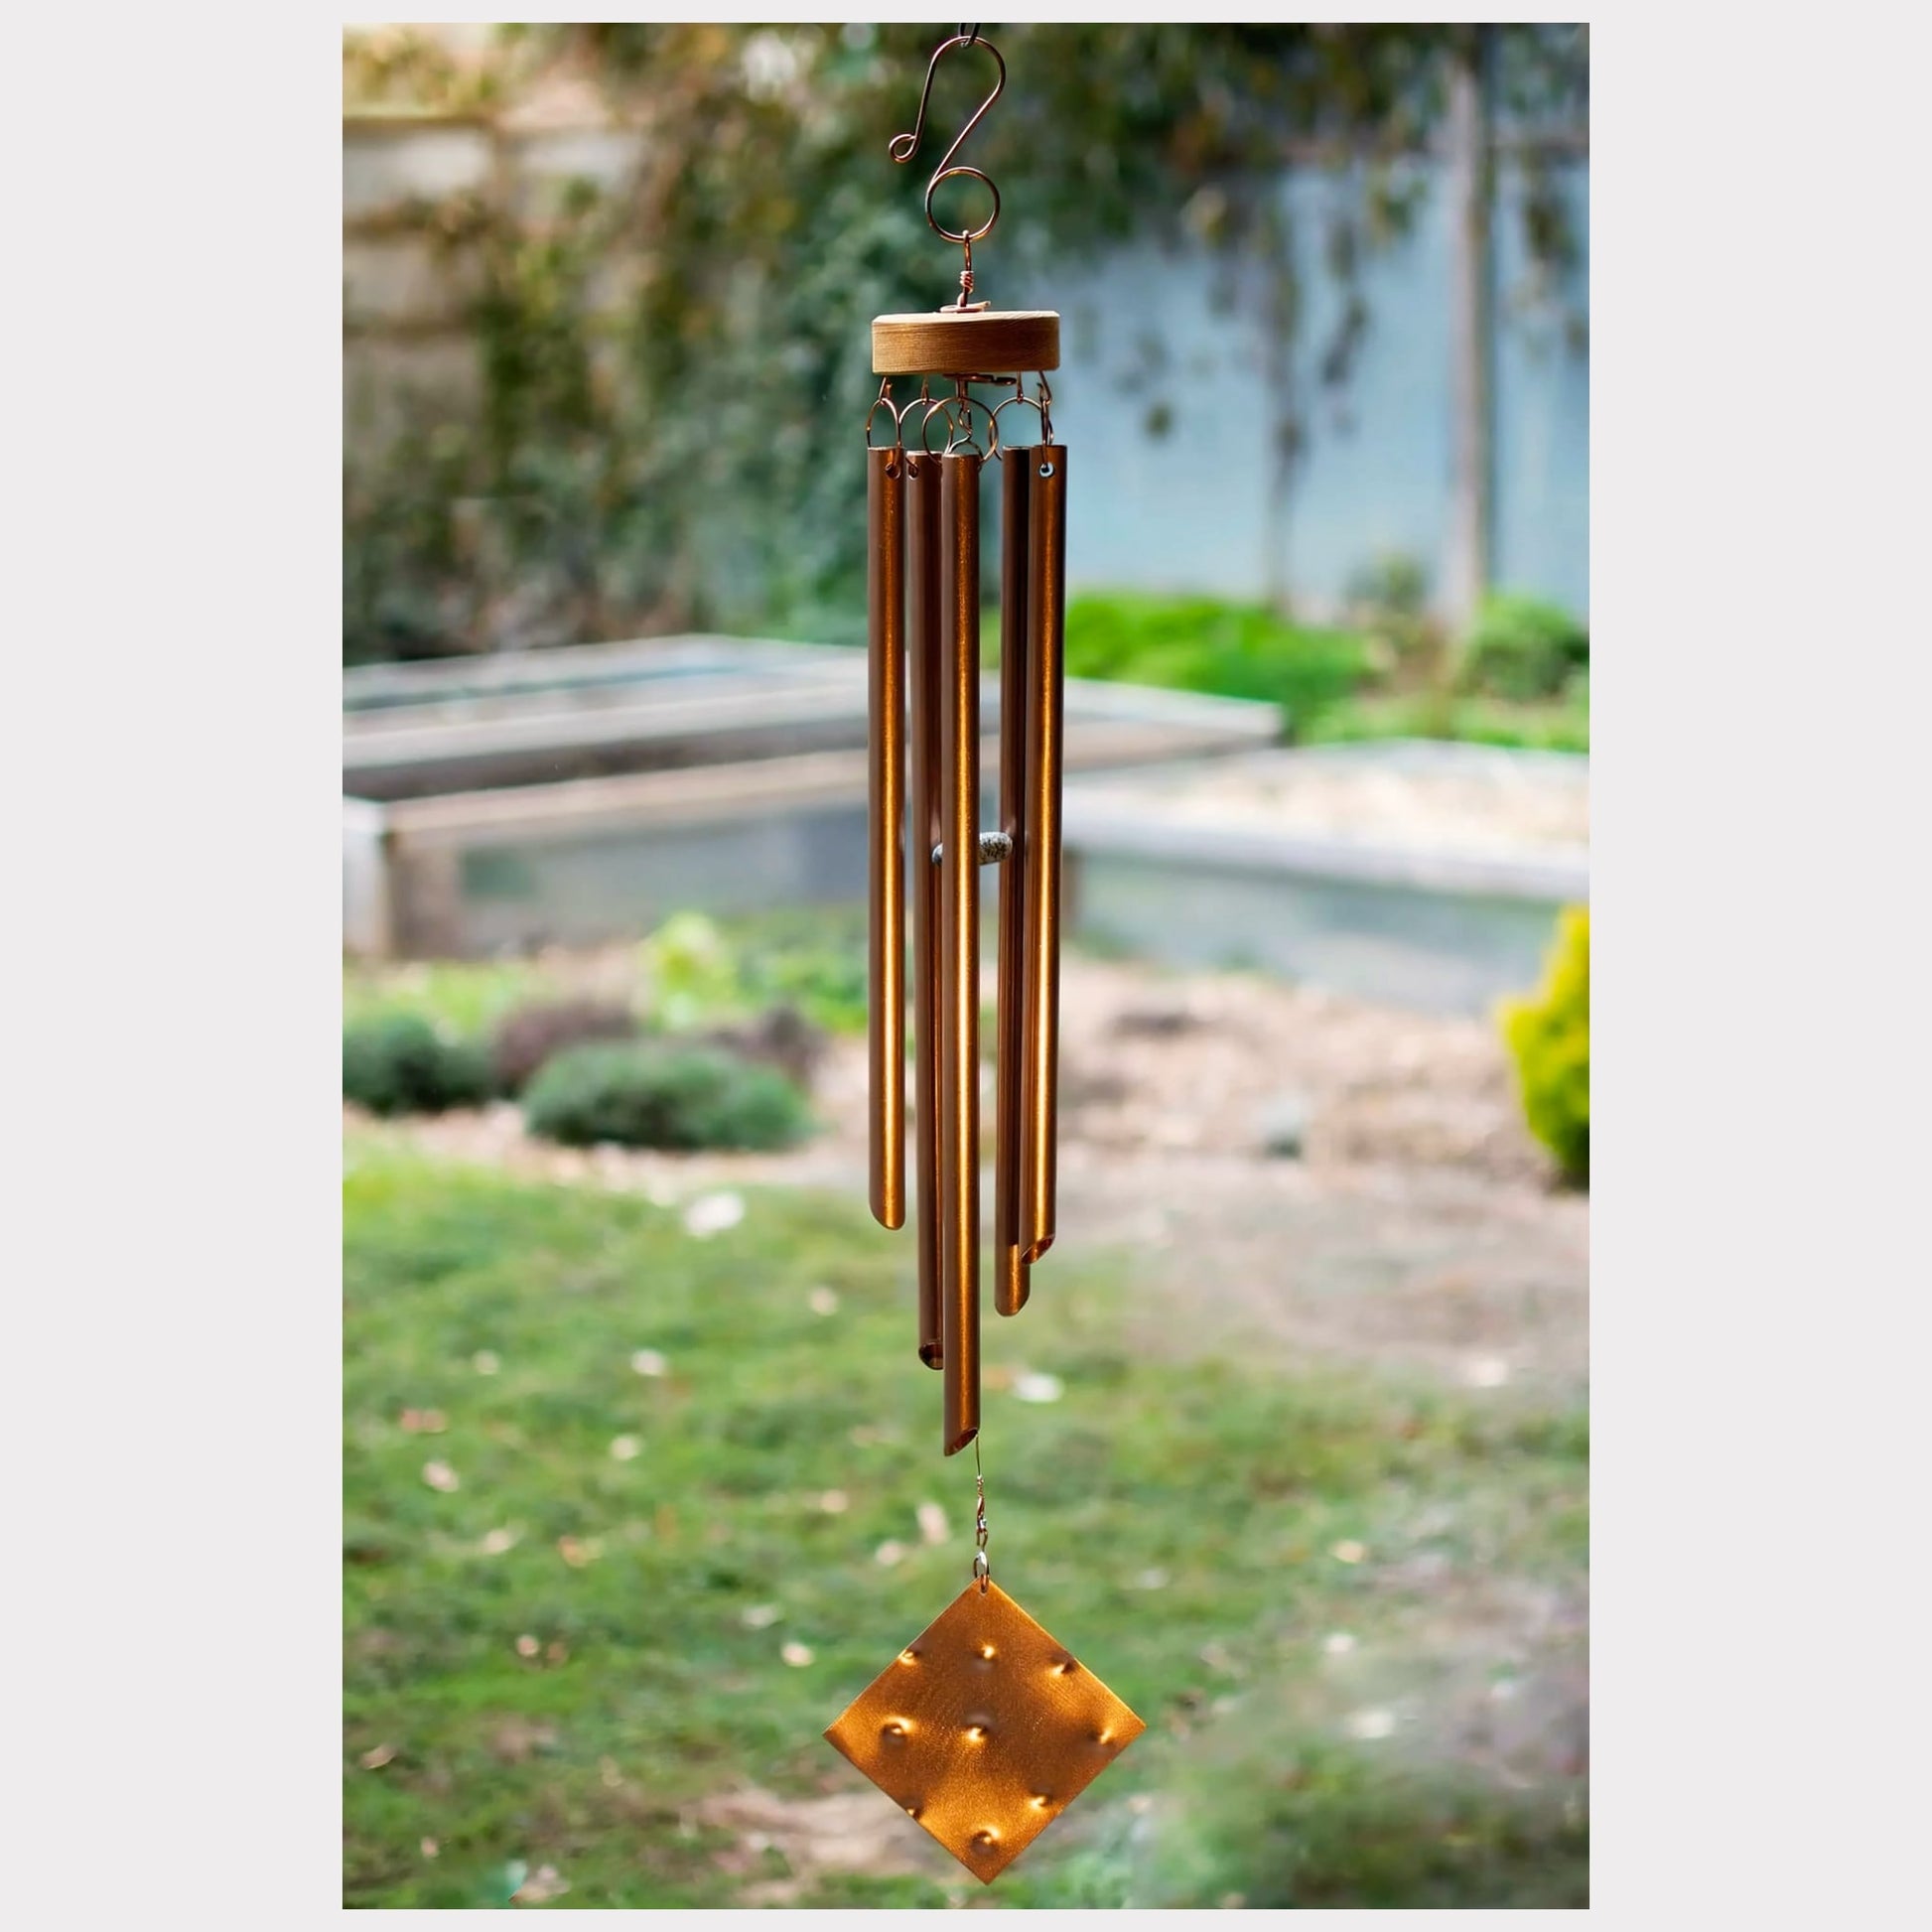 Handmade copper wind chime with a hammered copper windsail.